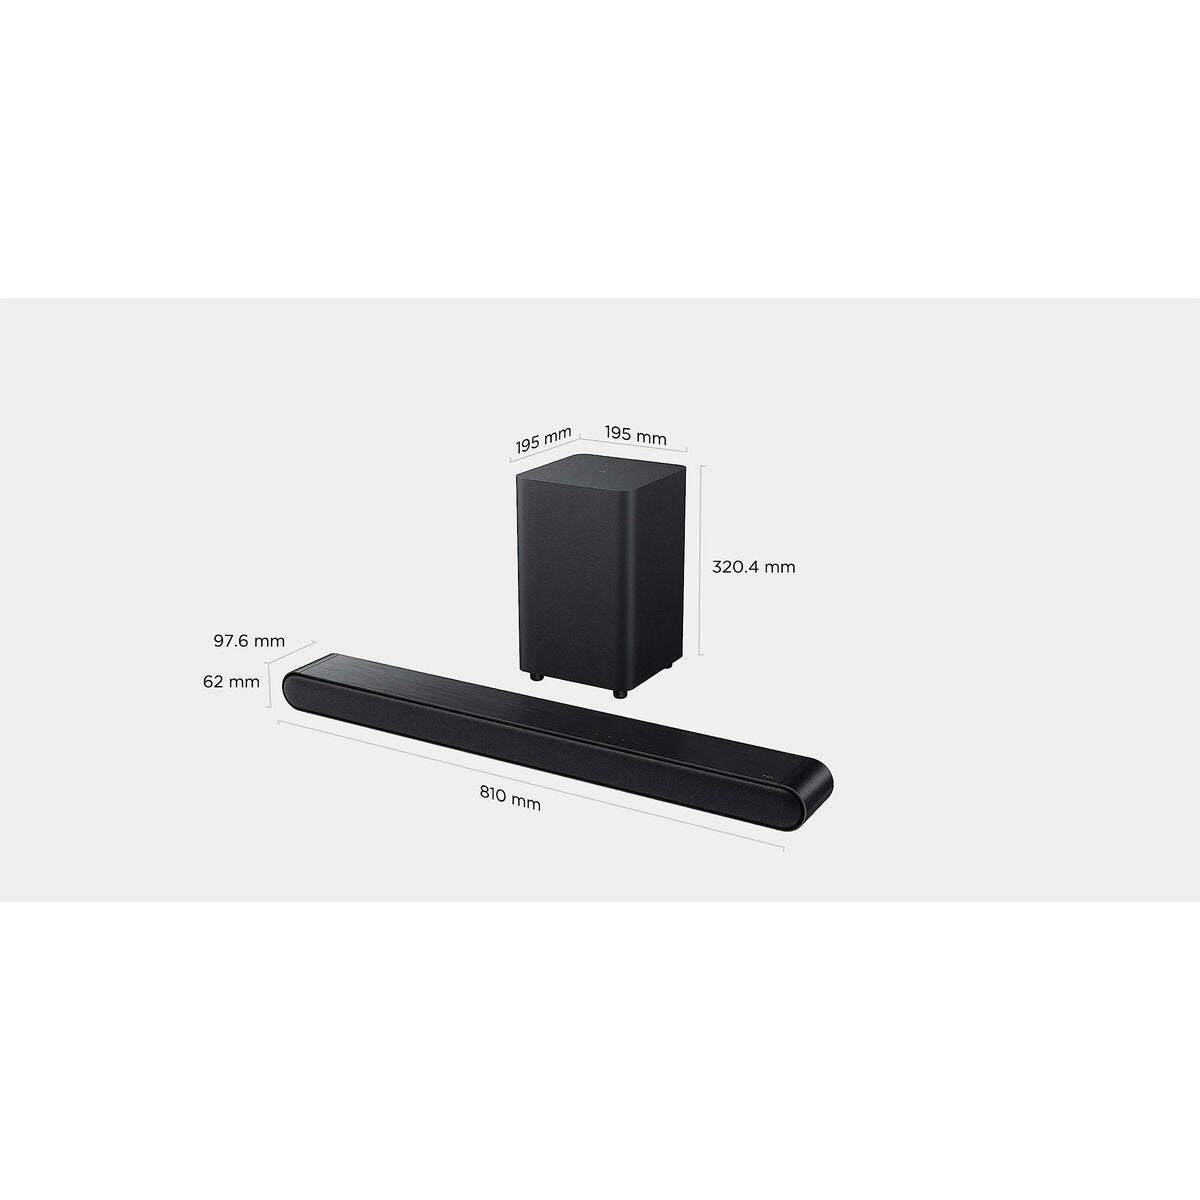 Soundbar TCL S643WE Black 240 W, TCL, Electronics, Audio and Hi-Fi equipment, soundbar-tcl-s643we-black-240-w, Brand_TCL, category-reference-2609, category-reference-2882, category-reference-2925, category-reference-t-19653, category-reference-t-7441, category-reference-t-7442, category-reference-t-7448, cinema and television, Condition_NEW, entertainment, music, Price_100 - 200, Teleworking, RiotNook